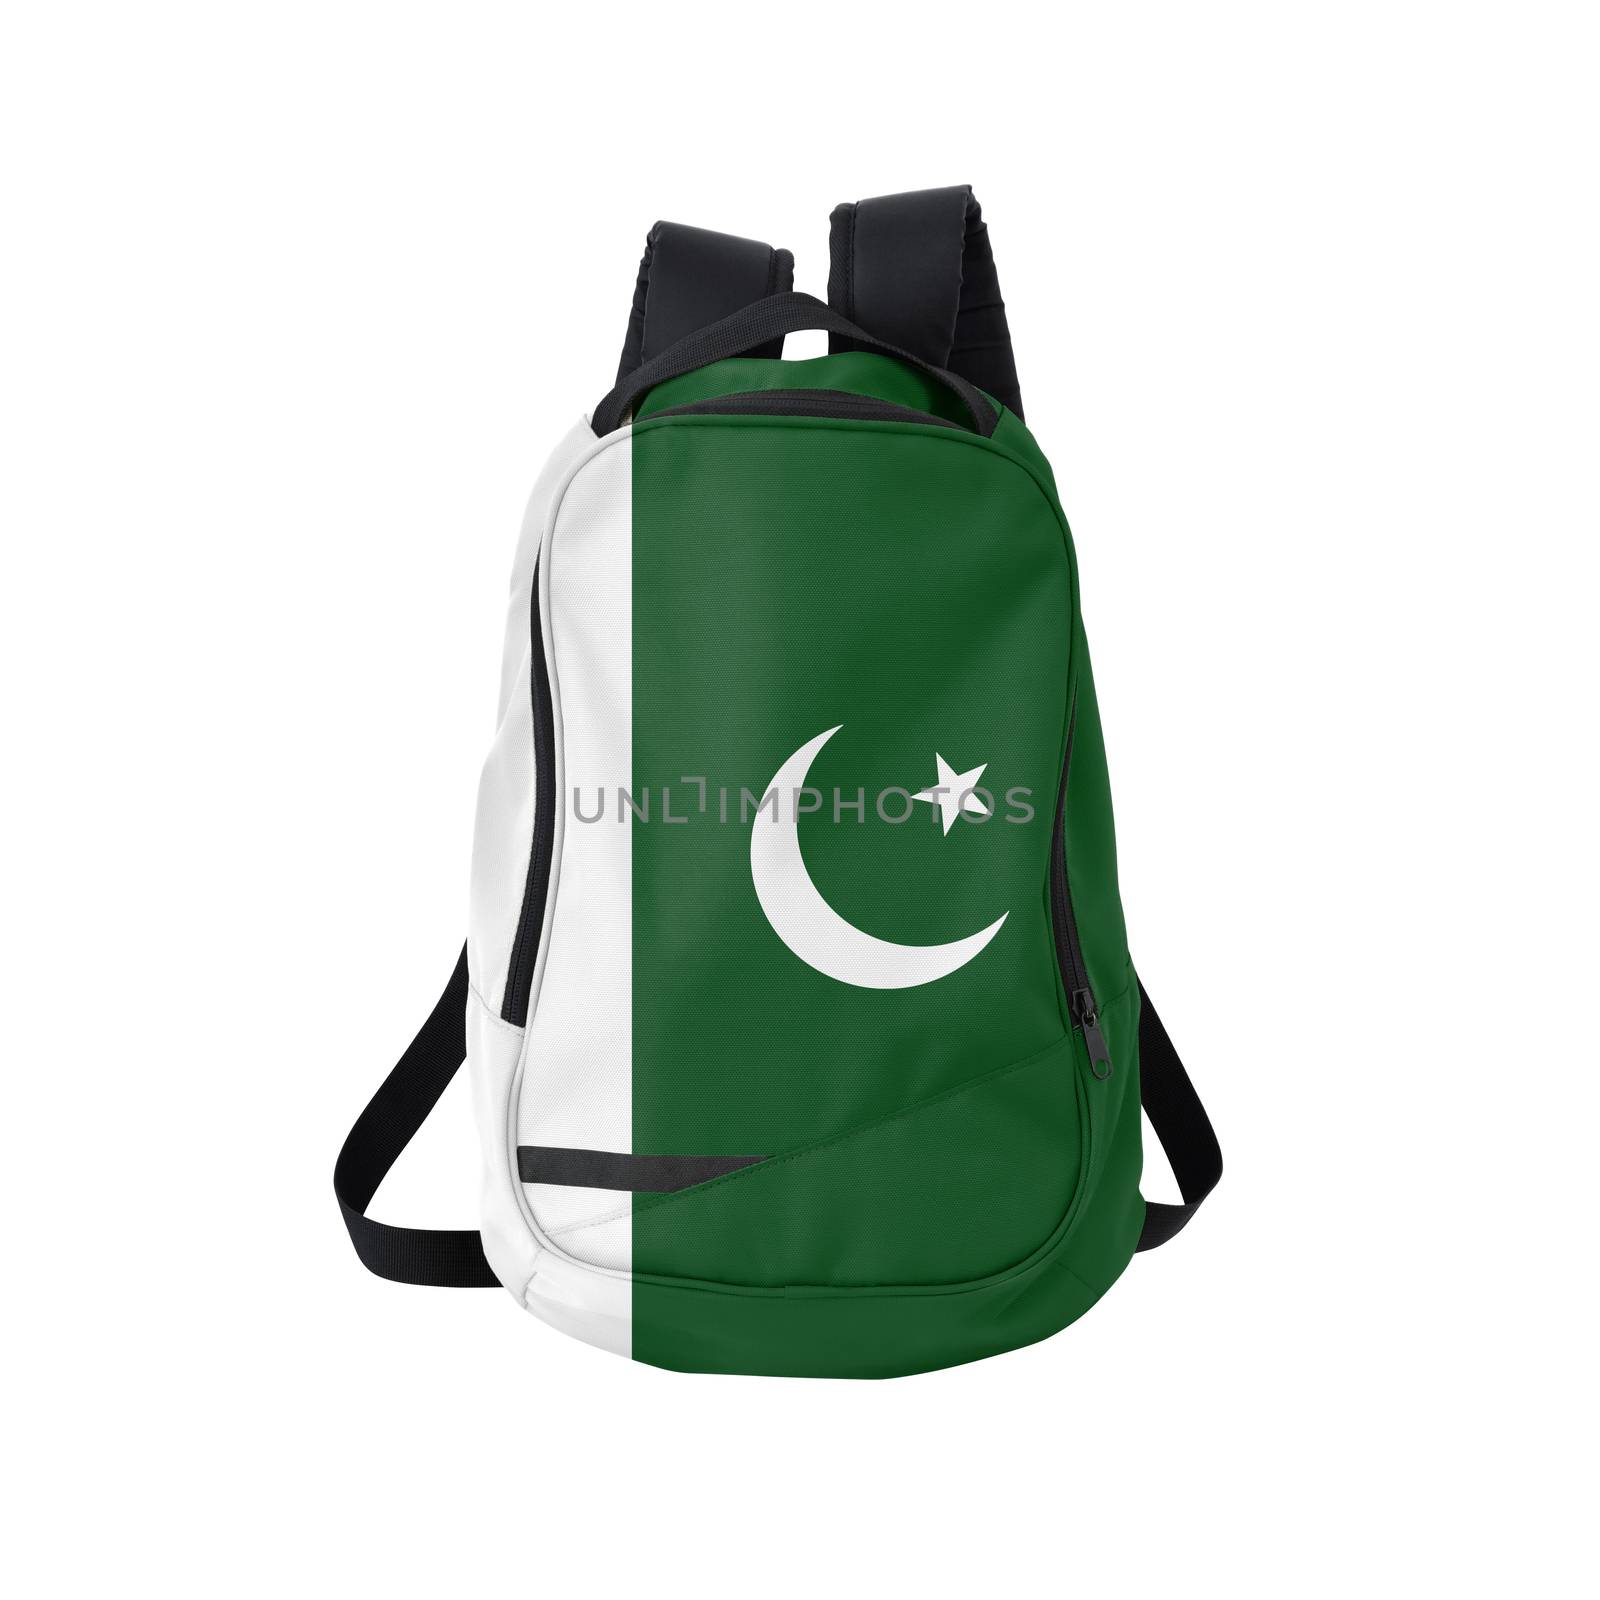 Pakistan flag backpack isolated on white by kravcs